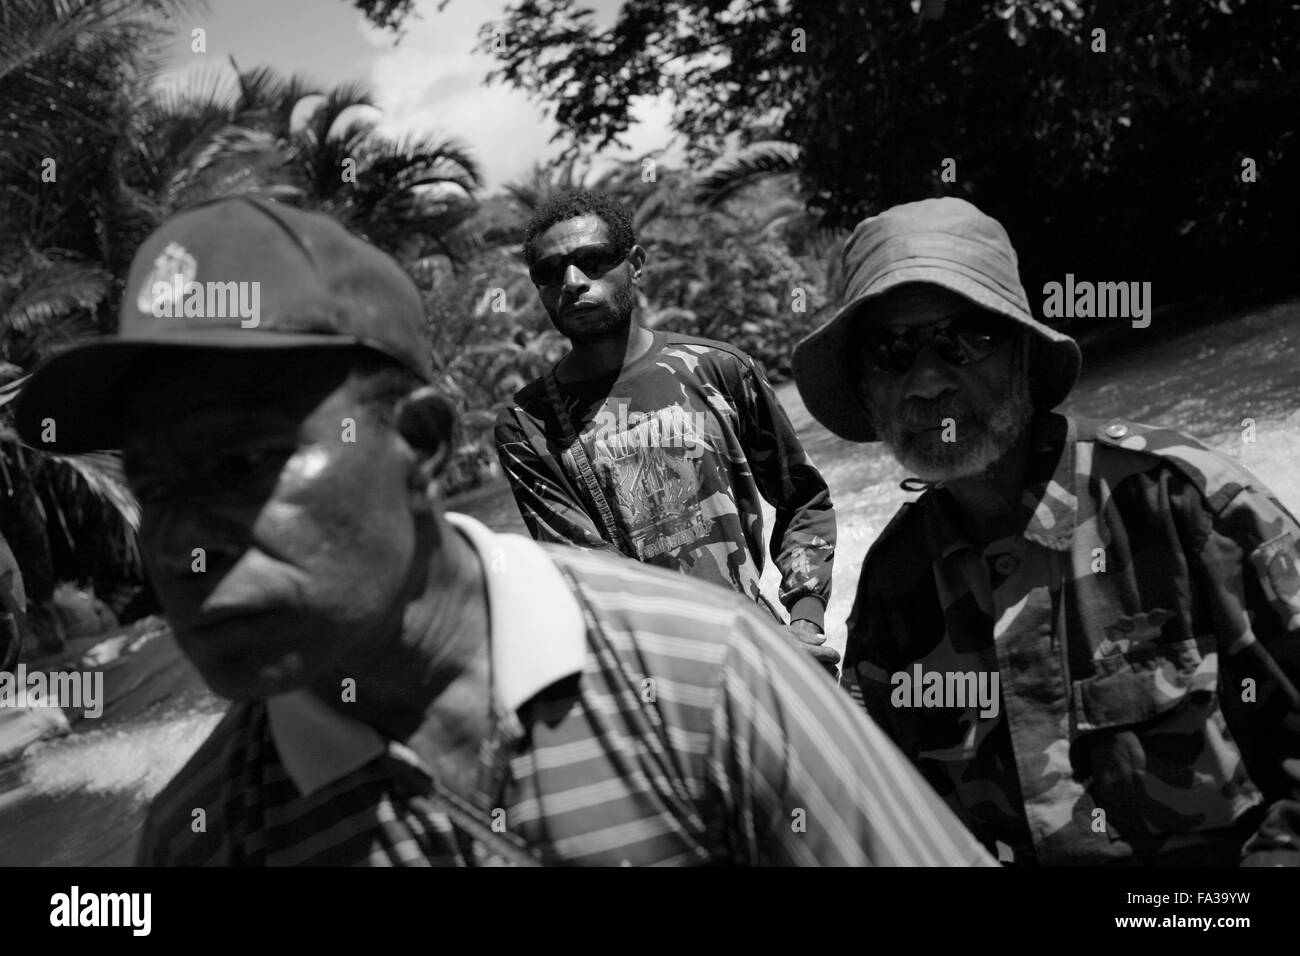 May 29, 2015 - West Papua - OPM commanders crossing the river on the way to their headquarters deep inside the jungles of West Papua (Credit Image: © Rohan Radheya via ZUMA Wire) Stock Photo